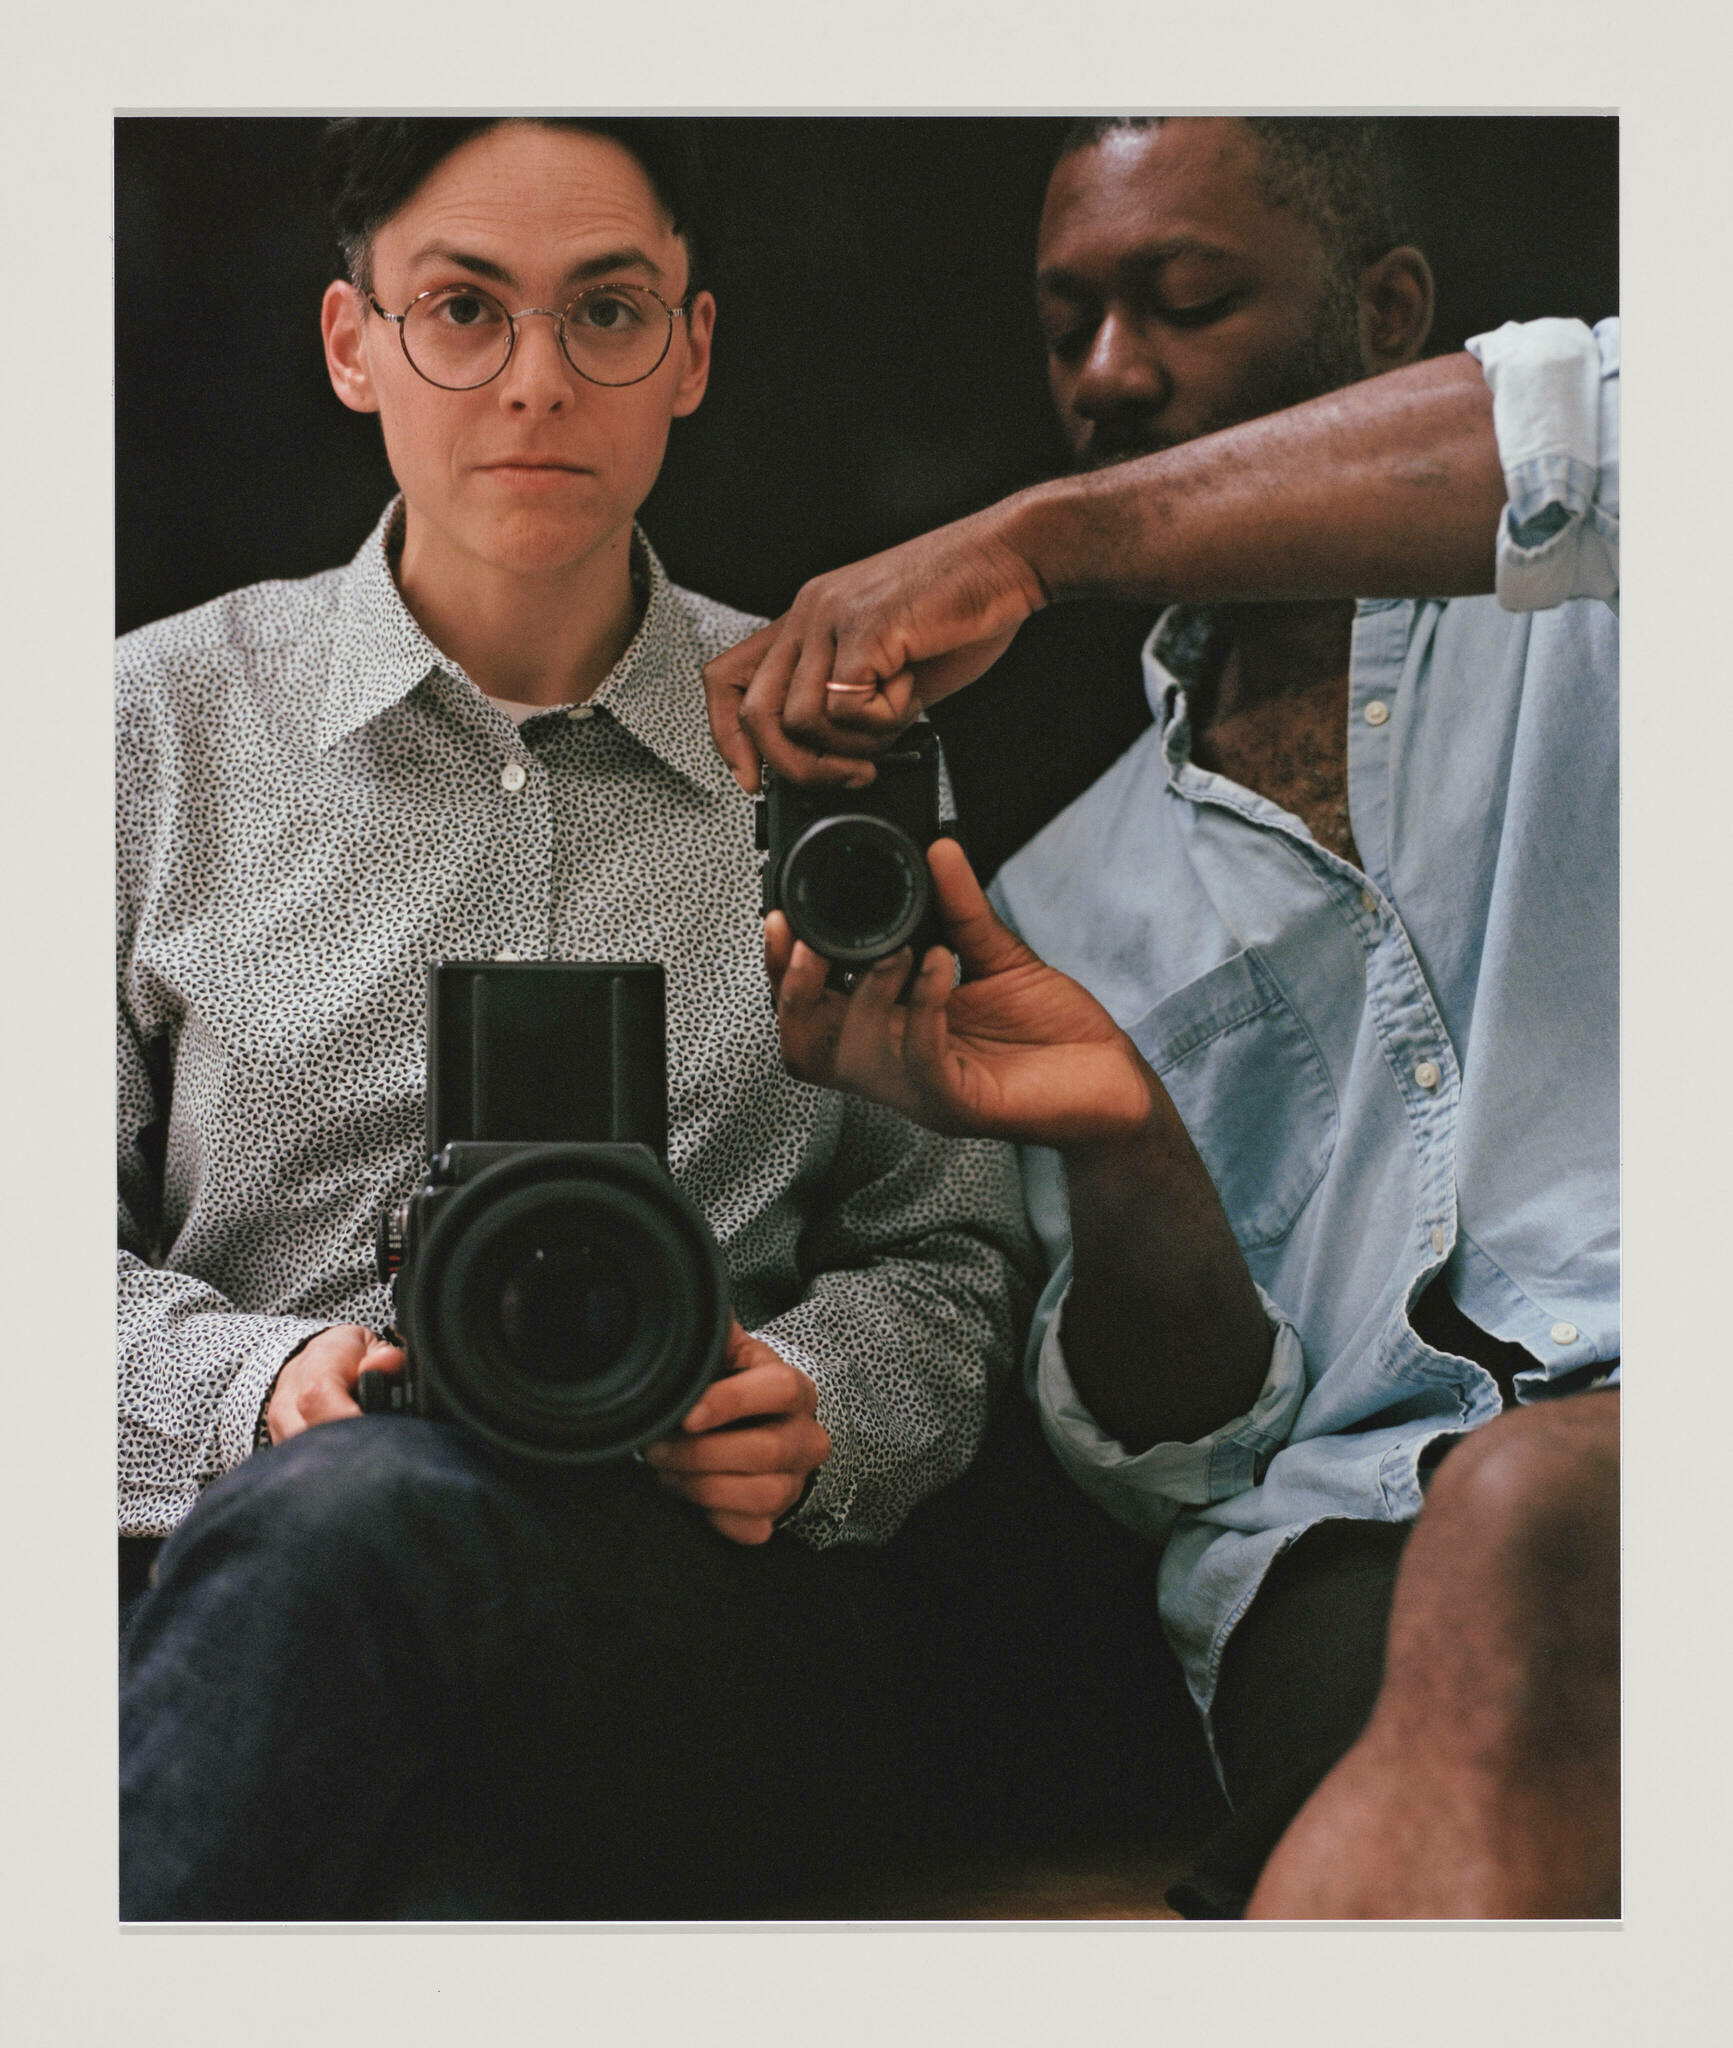 Two seated people, a white person in glasses and a Black person with a mustache, photograph their reflections with different size cameras